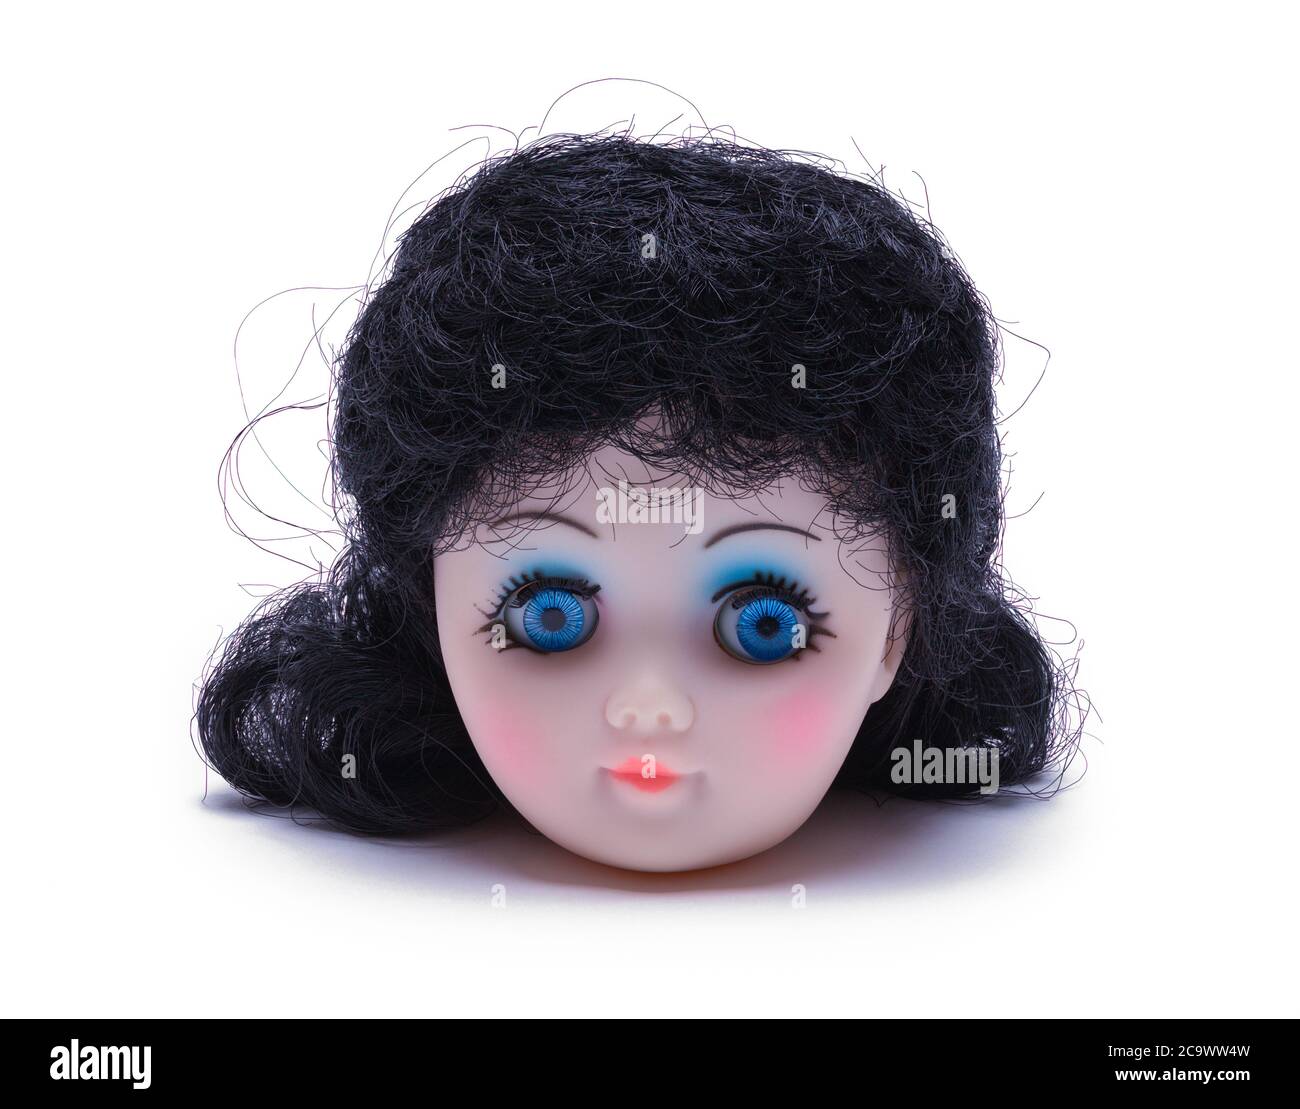 Toy Doll Head Isolated on White Background. Stock Photo